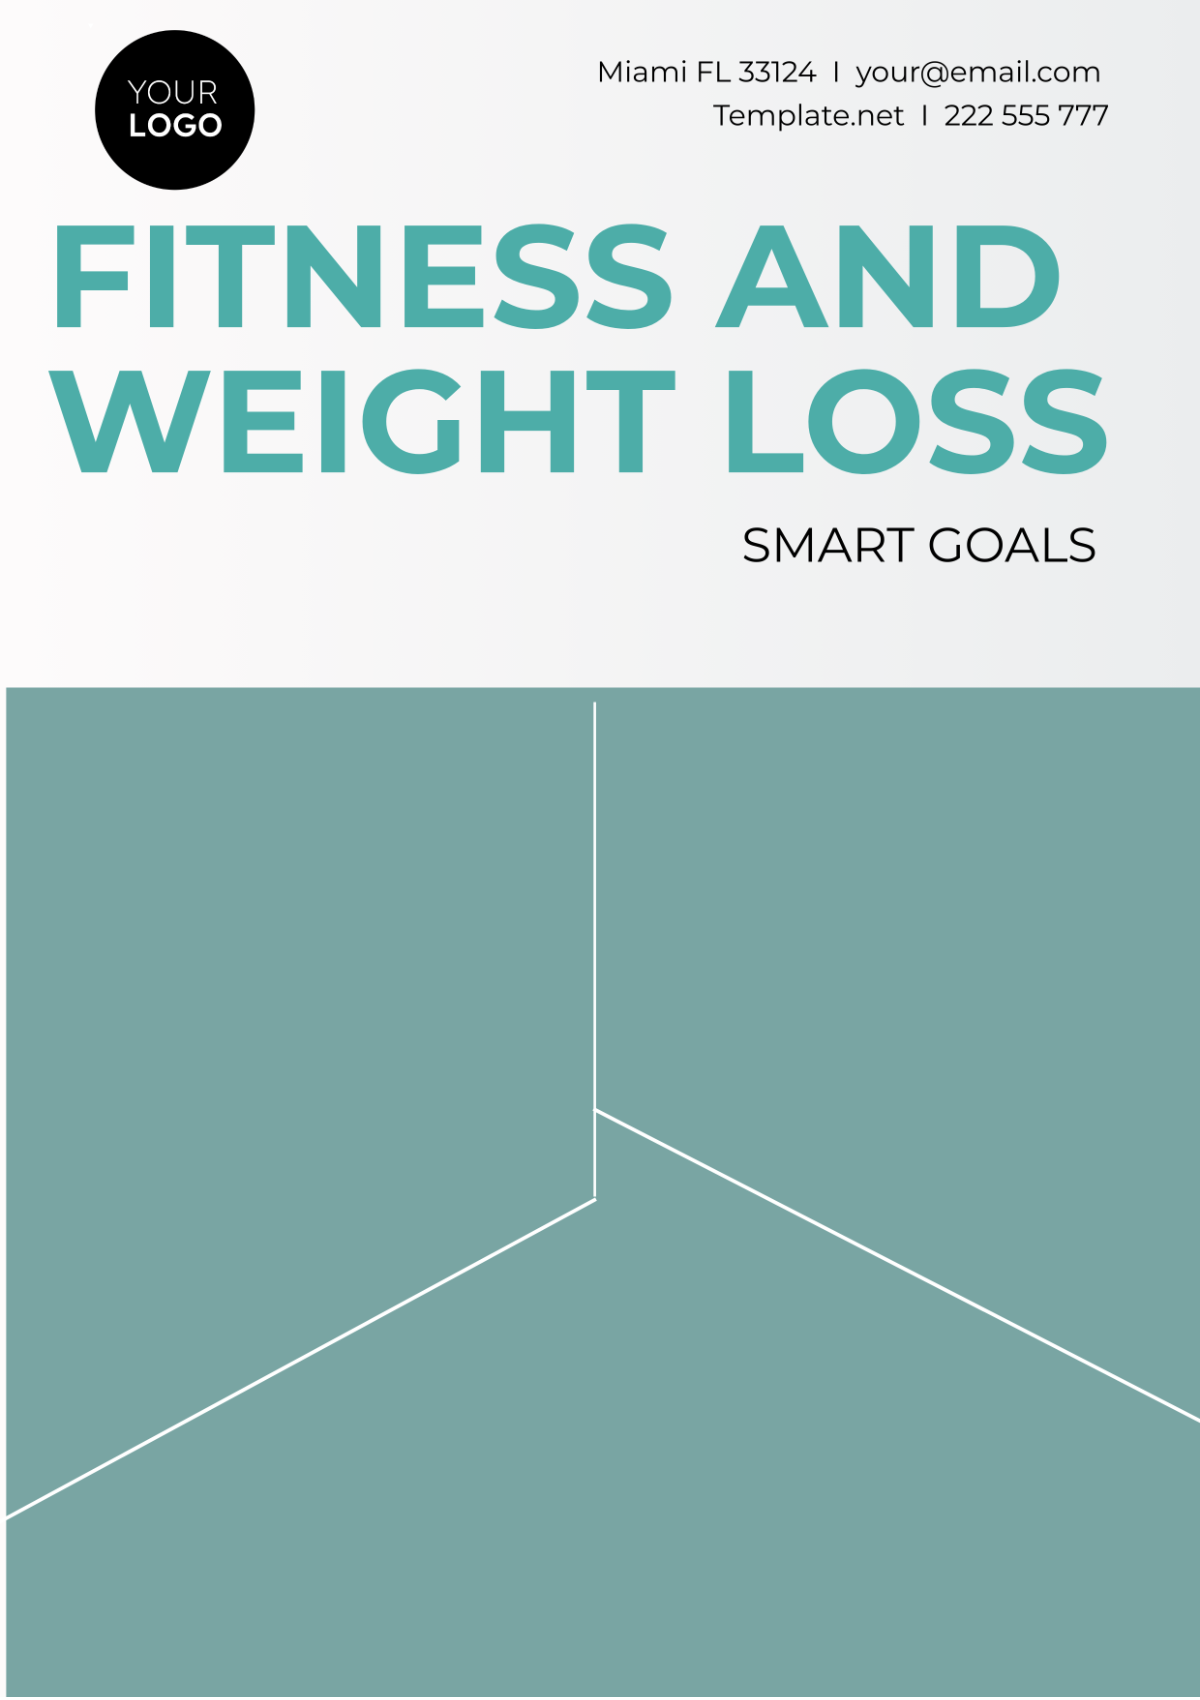 Fitness and Weight Loss SMART Goals Template